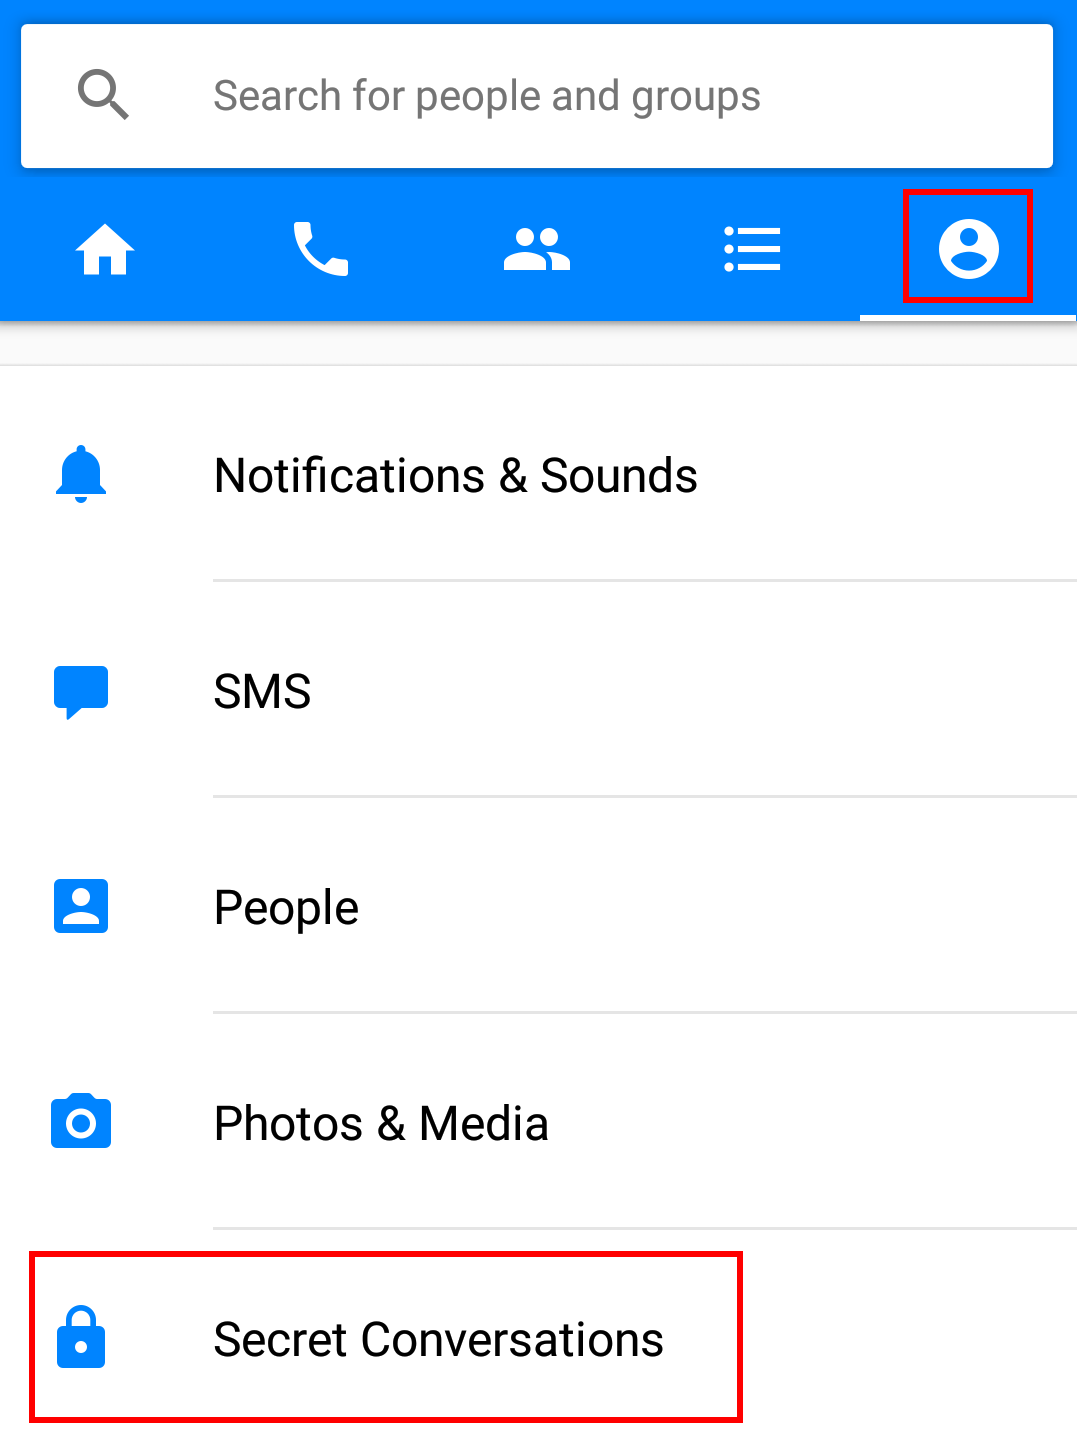 Can I use multiple devices for secret conversations in Messenger?